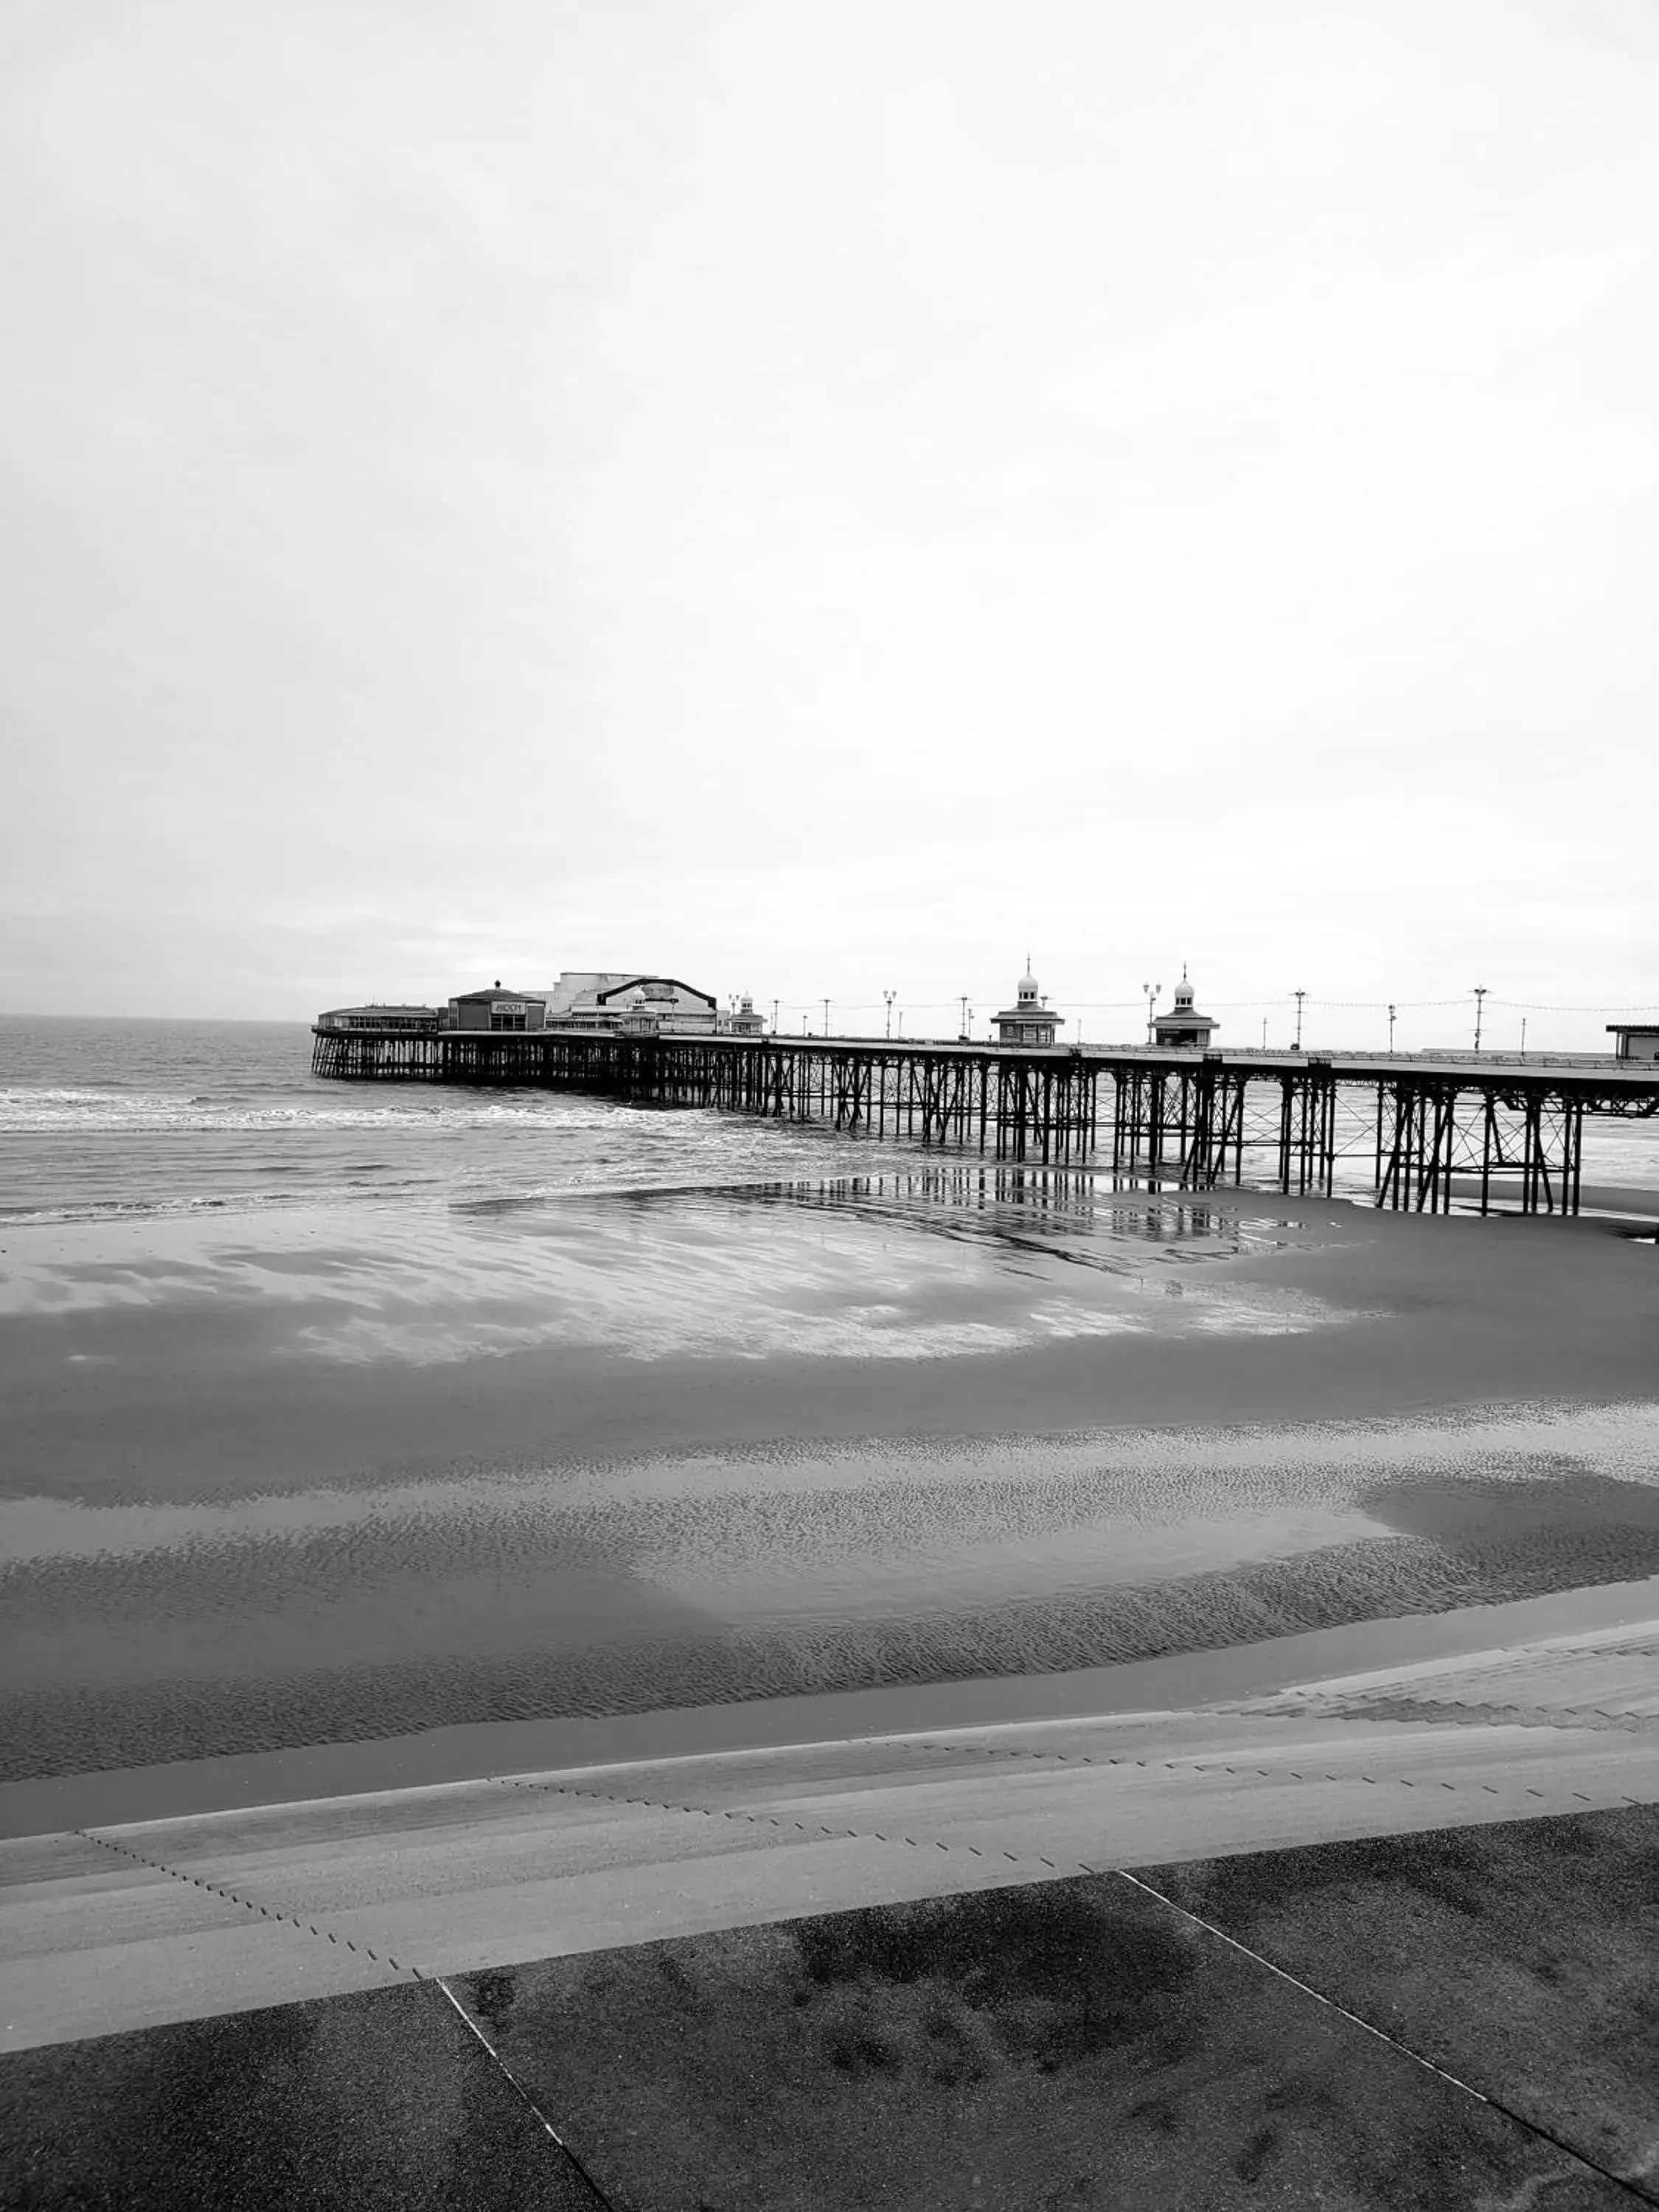 Location, Winter in The Clevedon